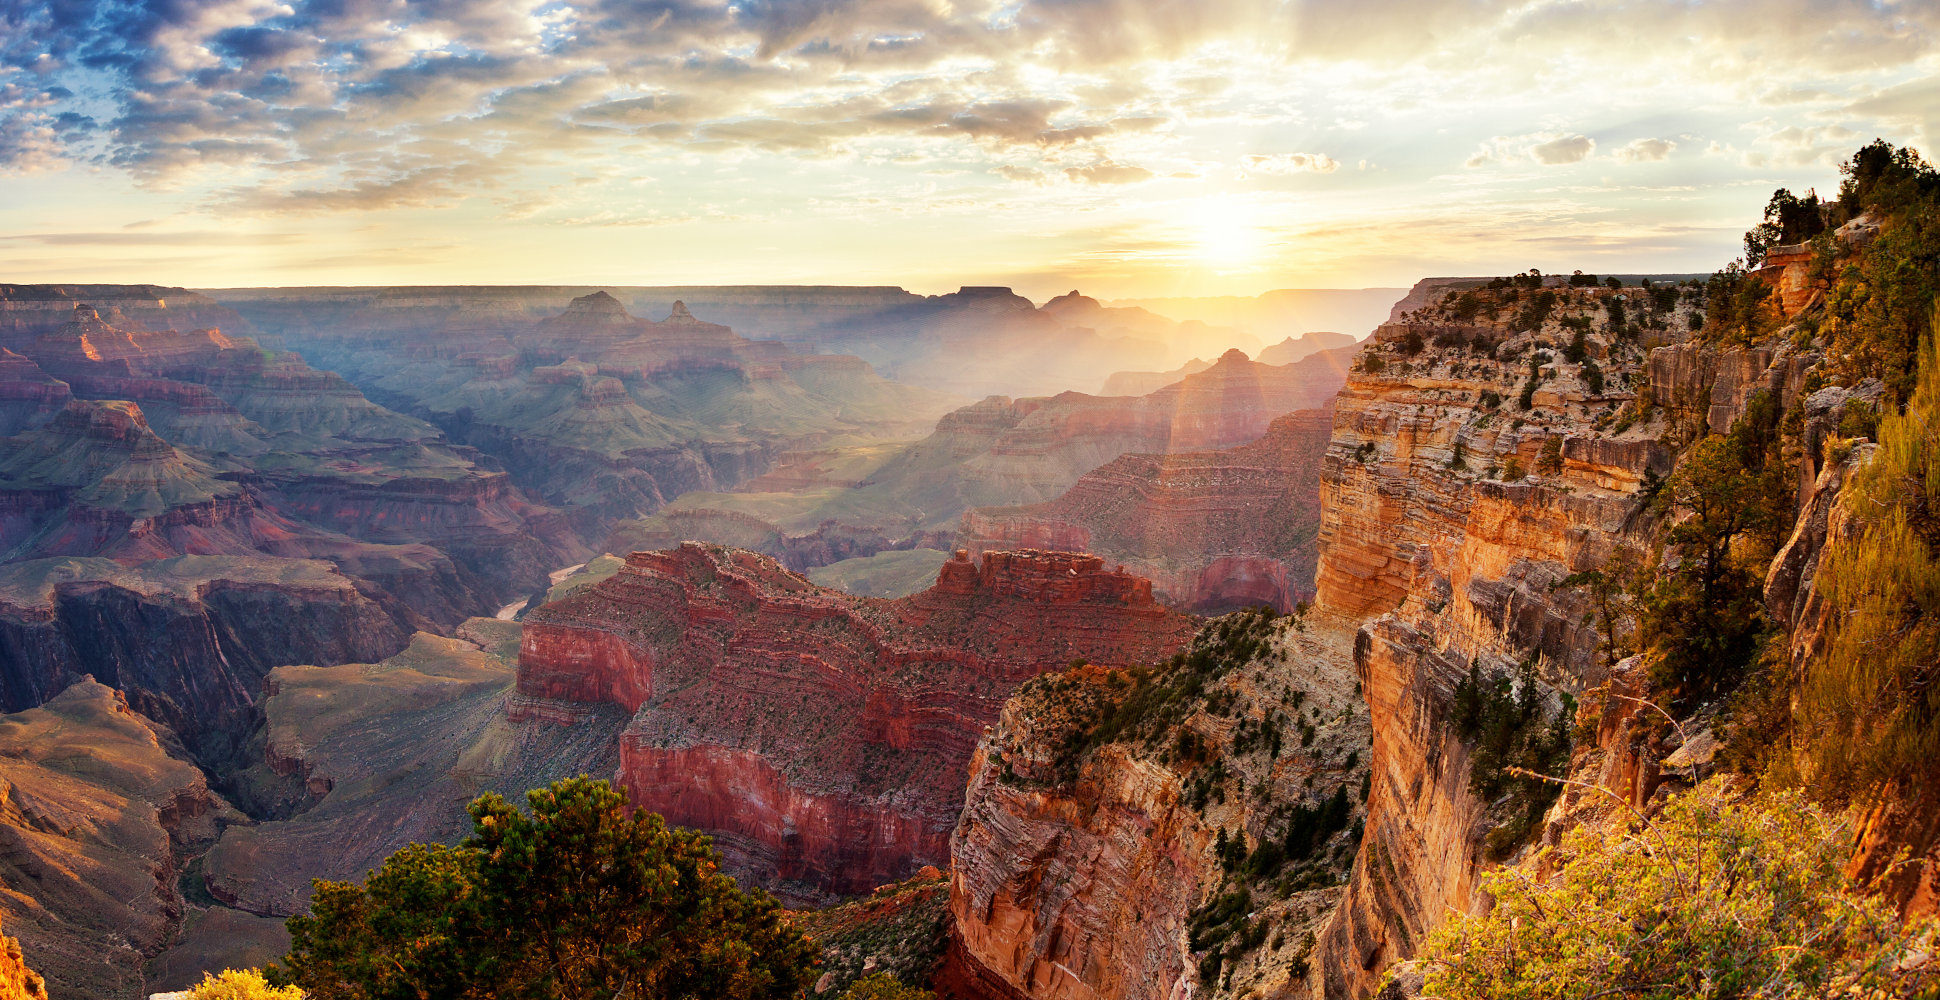 Sunrise in Grand Canyon National Park